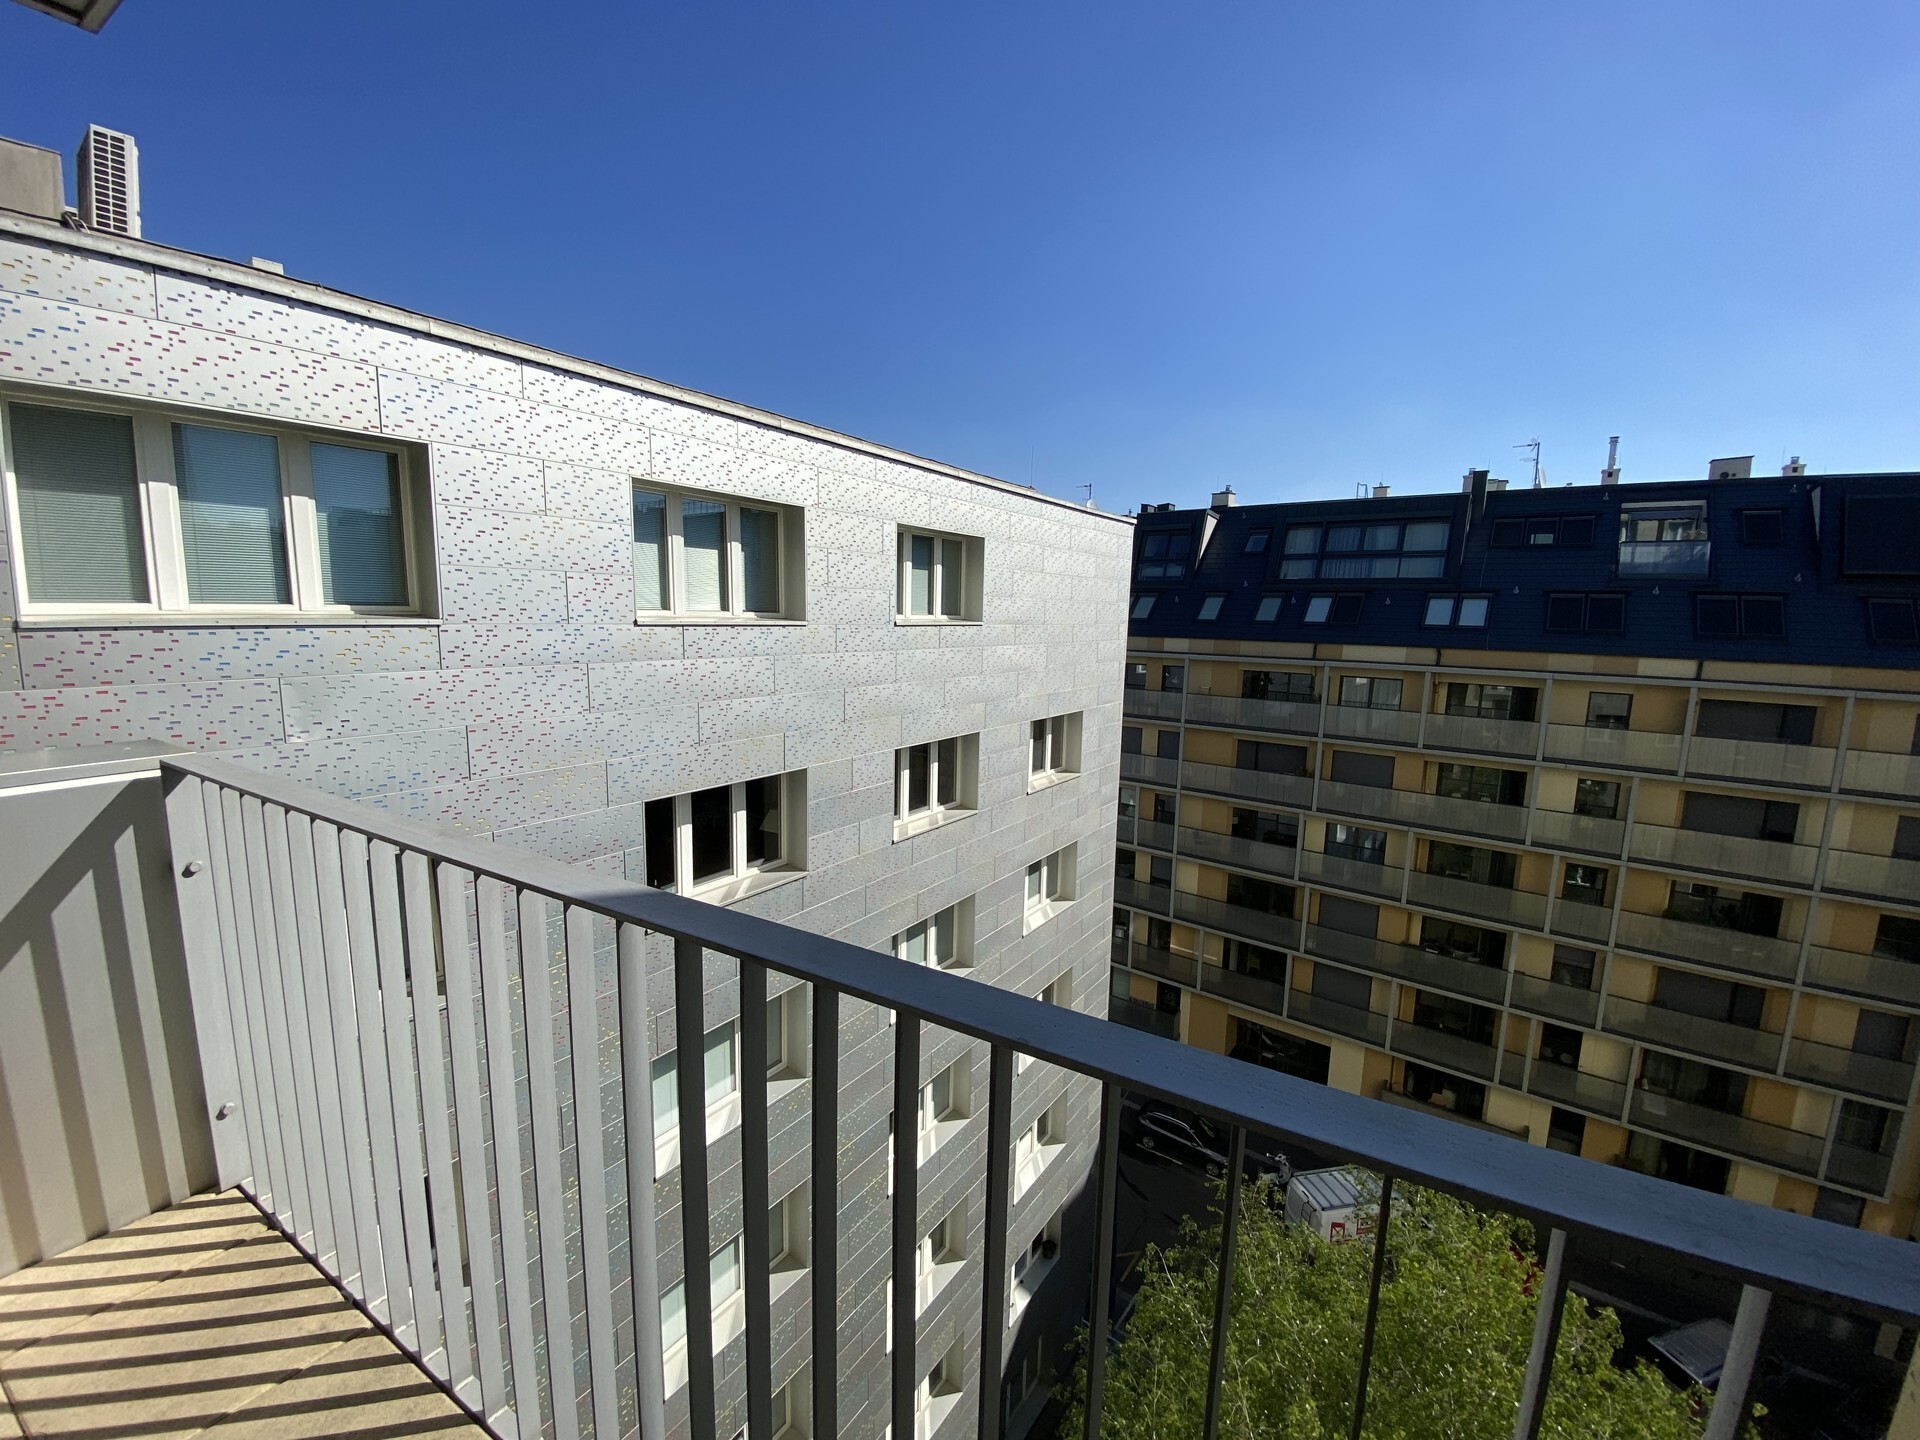 Fantastic 3-room apartment with small balcony on the 6th floor directly at Modenapark - for rent in 1030 Vienna